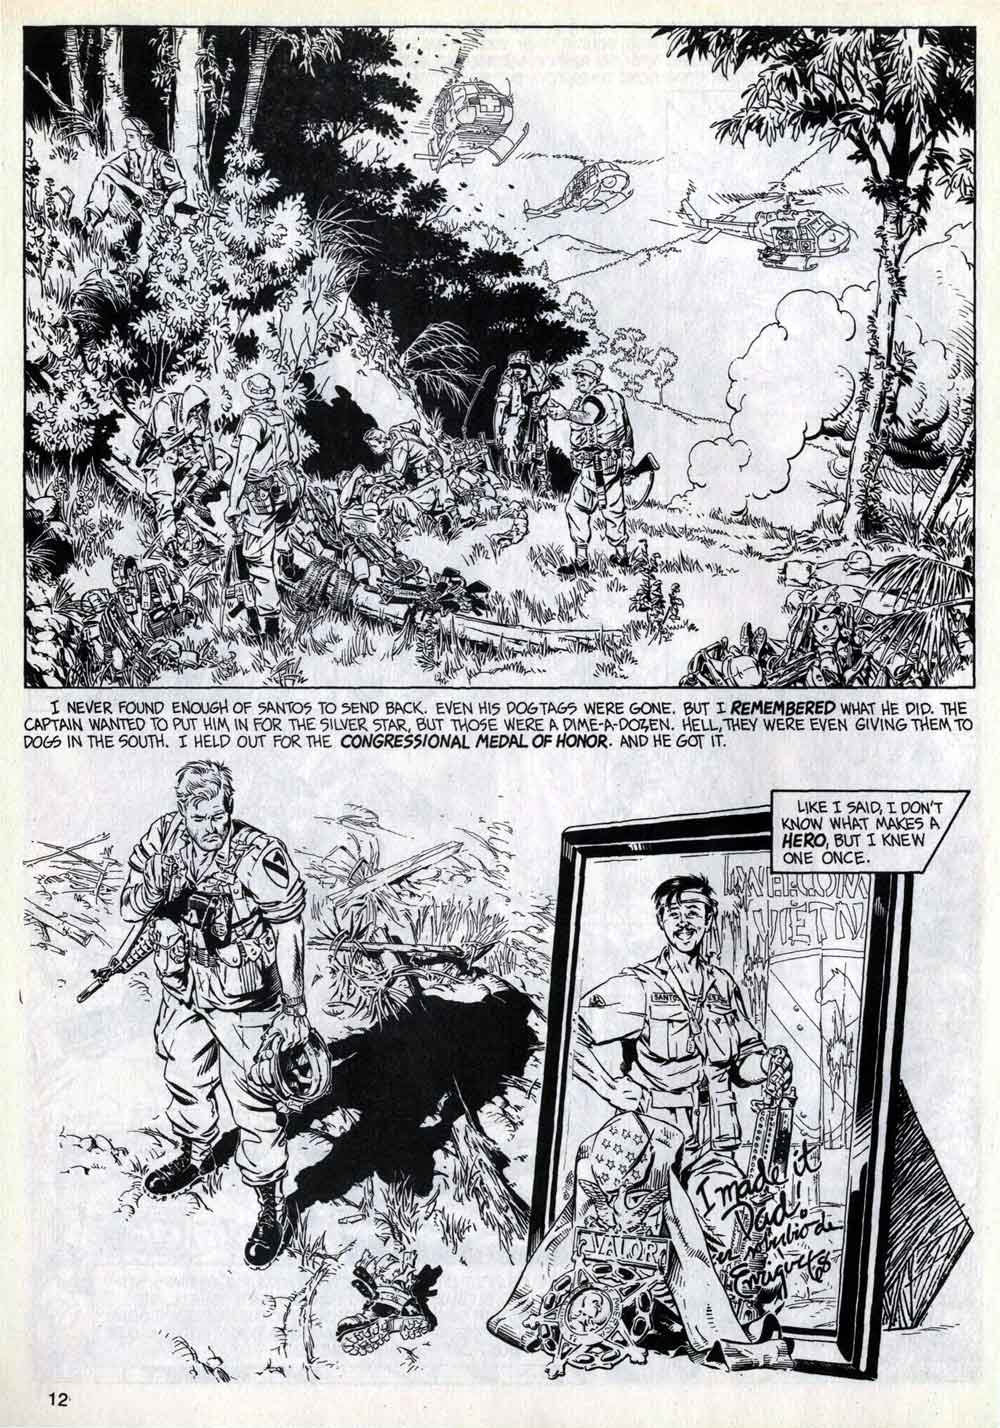 SAVAGE TALES #1 featuring The Nam, 1967… "5th To The 1st" by Doug Murray and Michael Golden